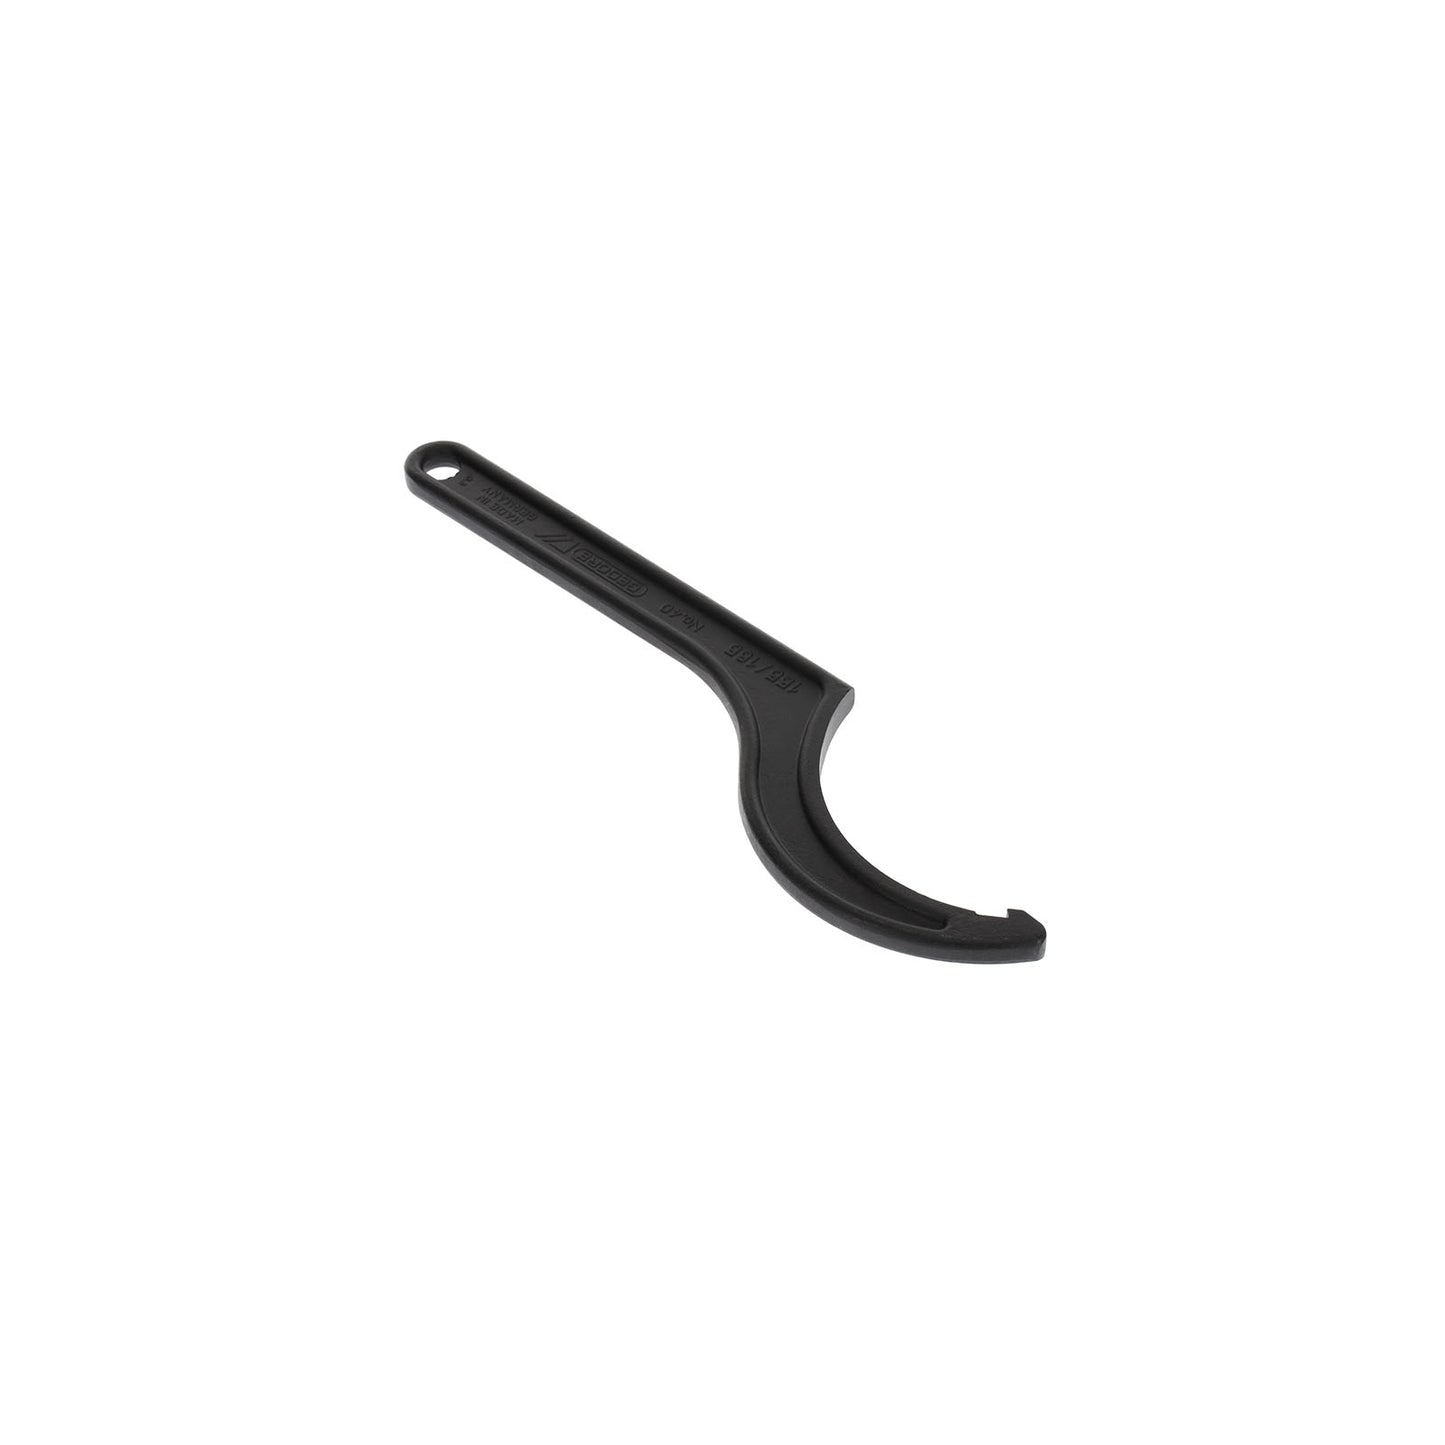 GEDORE 40 155-165 - Hook Wrench, 155-165 (6335500)